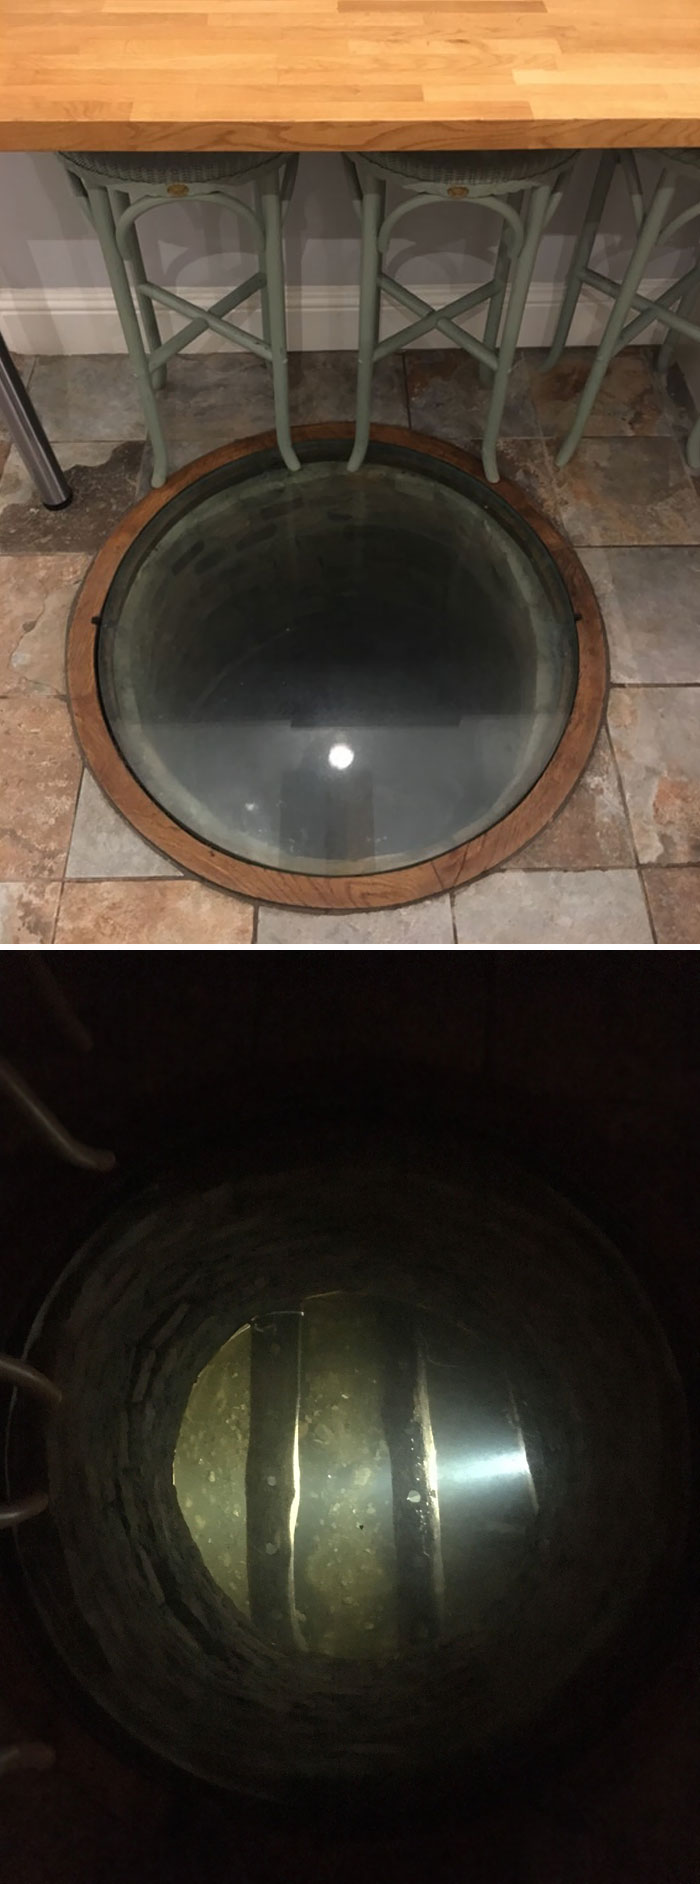 The House I'm Staying In Has Kept Its Original Well As A Feature